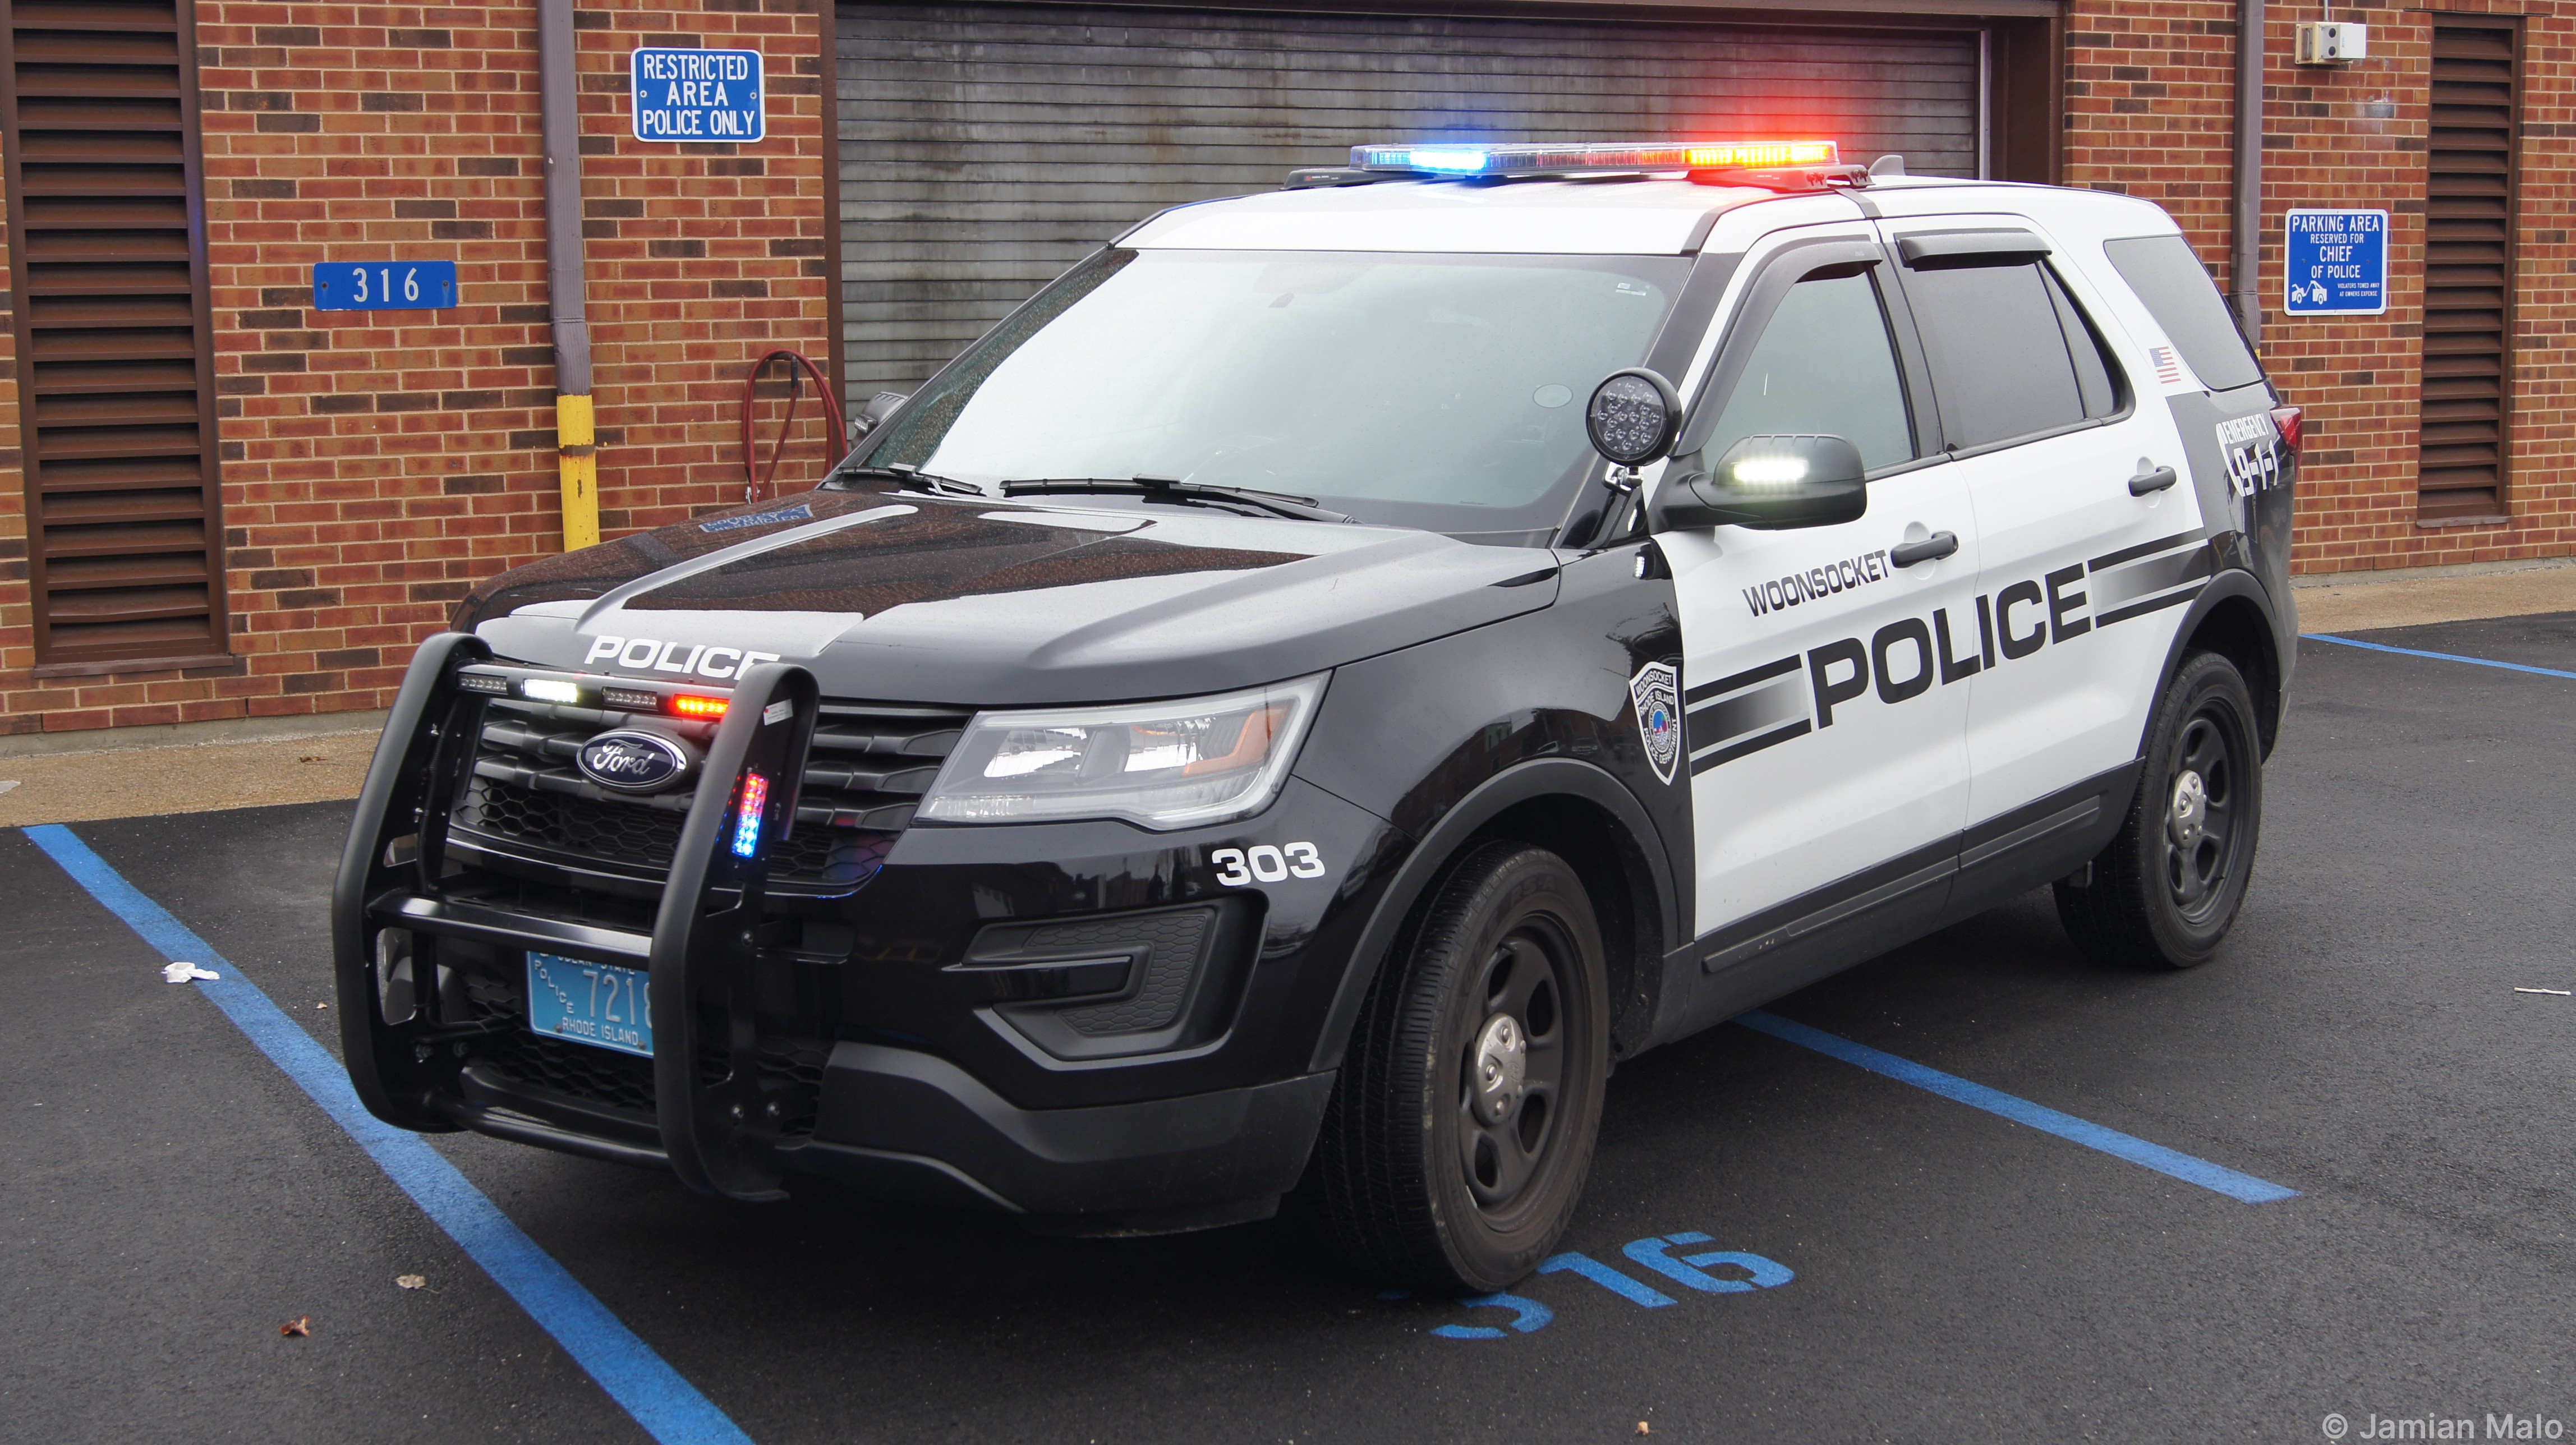 A photo  of Woonsocket Police
            Cruiser 303, a 2019 Ford Police Interceptor Utility             taken by Jamian Malo